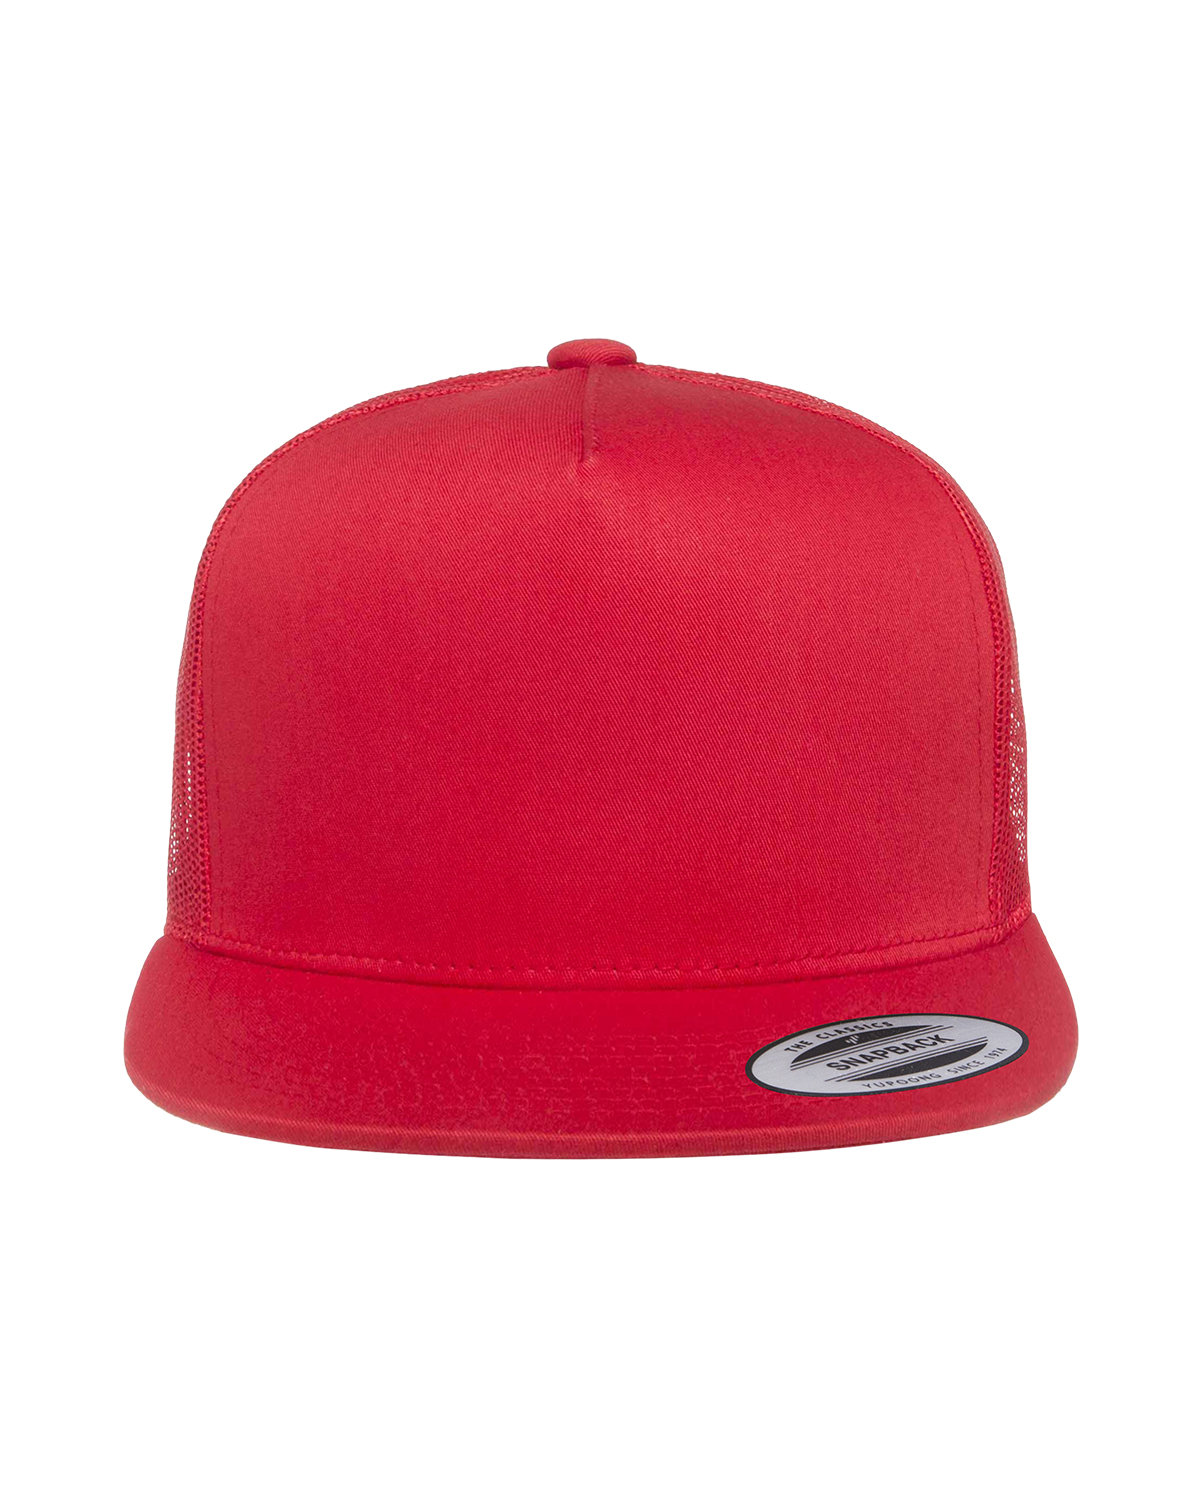 Yupoong Adult 5-Panel Classic Trucker Cap RED 